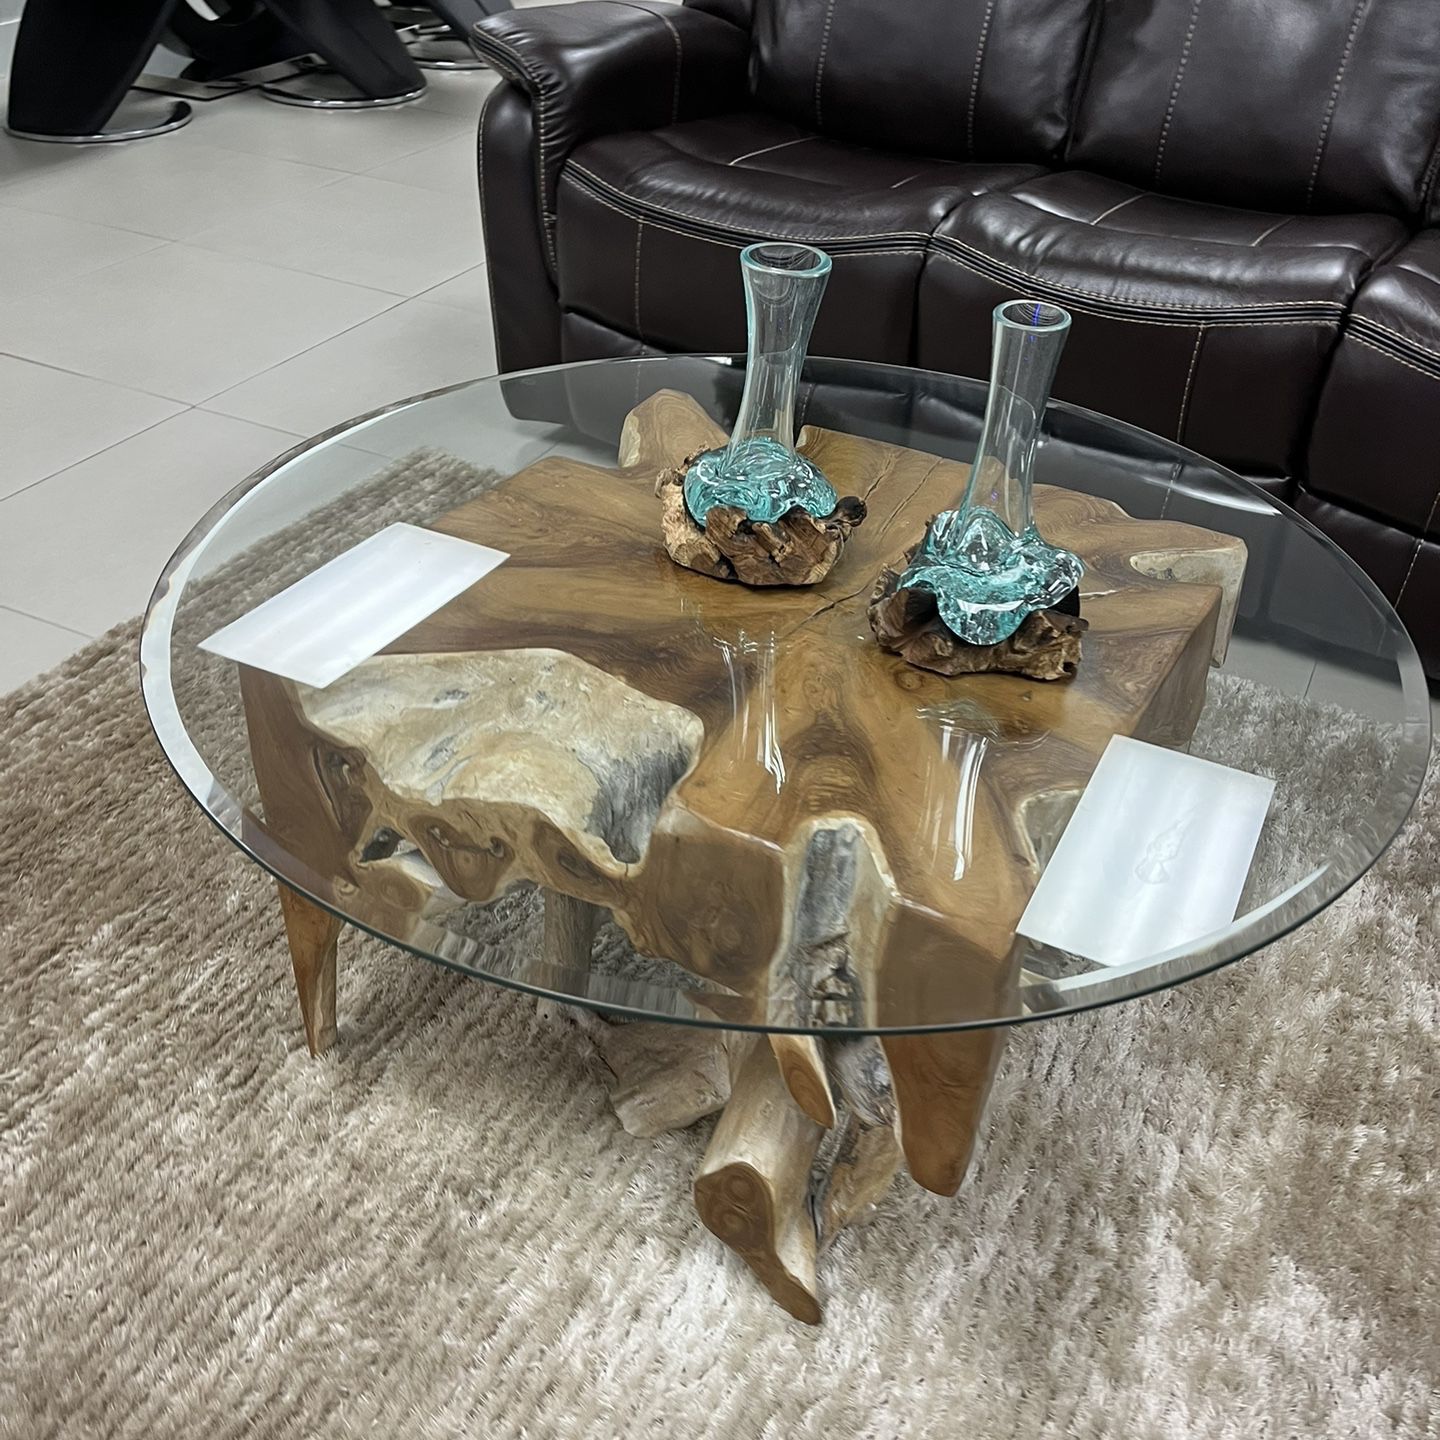 TEAK WOOD COFFEE TABLE WITH GLASS TOP ON CLEARANCE STORE CLOSING EVERYTHING MUST GO !!!!****OFFER ENDS 02.15 